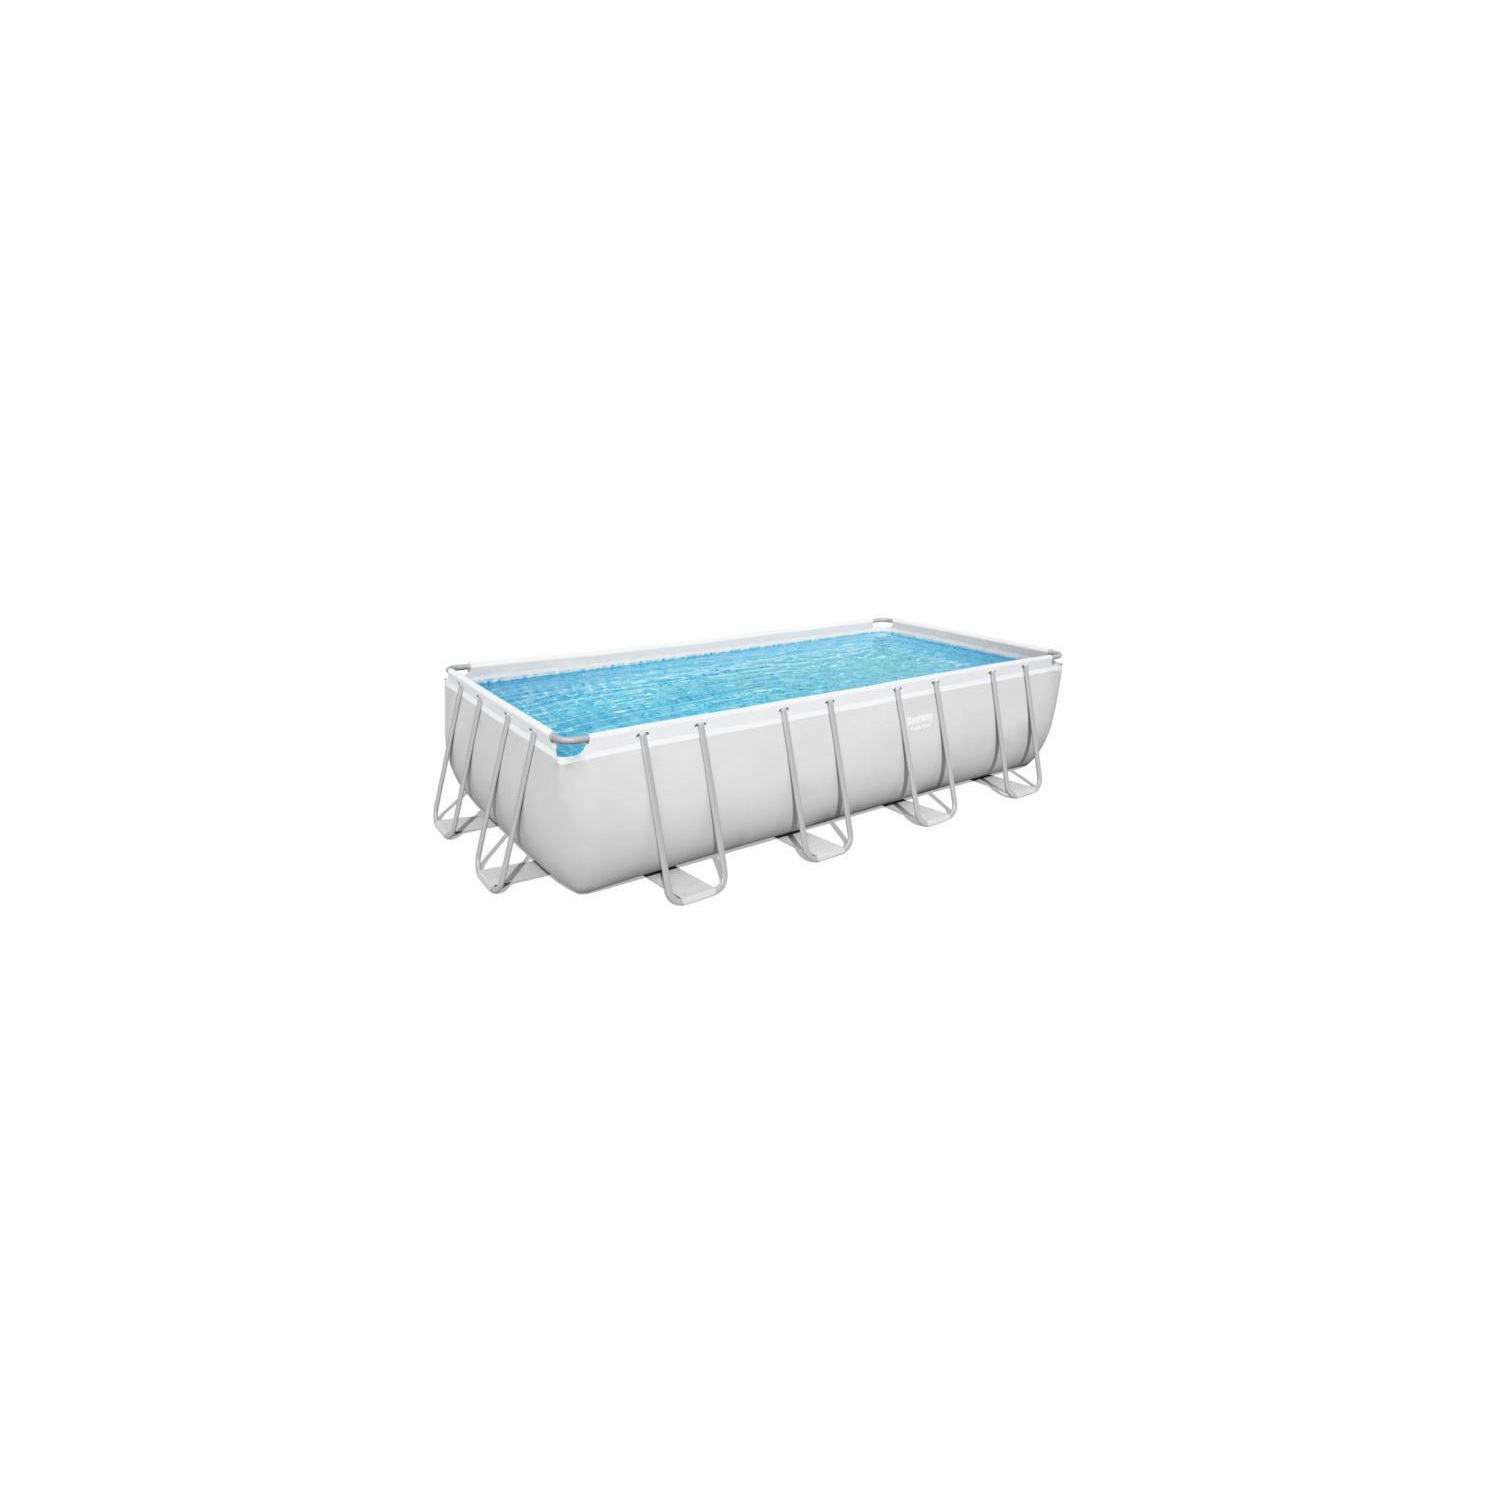 Bestway Power Steel™ 16' x 8' x 48"/4.88m x 2.44m x 1.22m Rectangular Pool Set prime choice for families because of its superior steel frame design engineered for maximum strength.